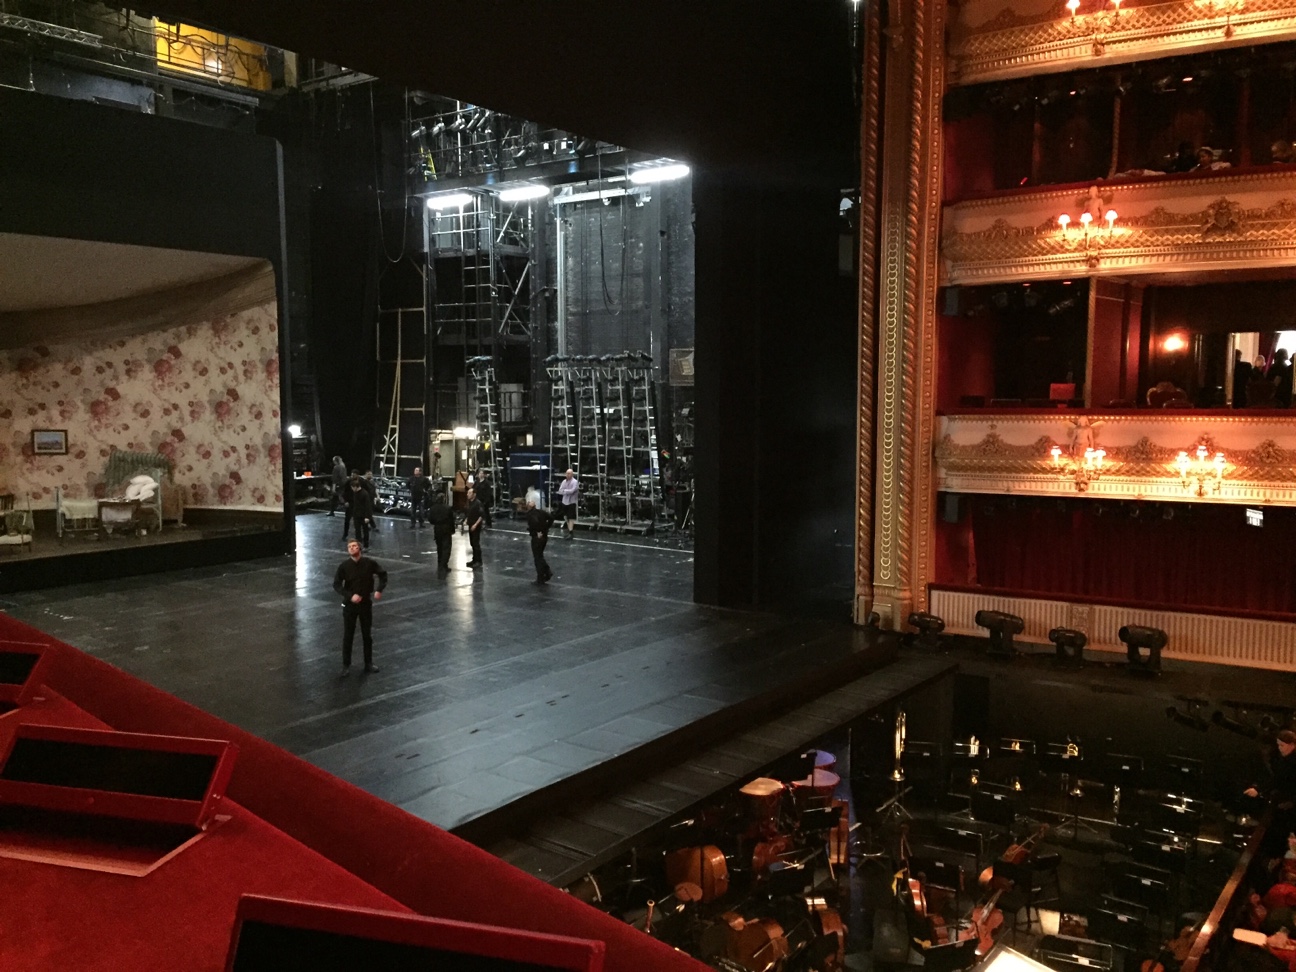 Change of scenery: Between Il tabarro to Gianni Schicchi at the Royal Opera House